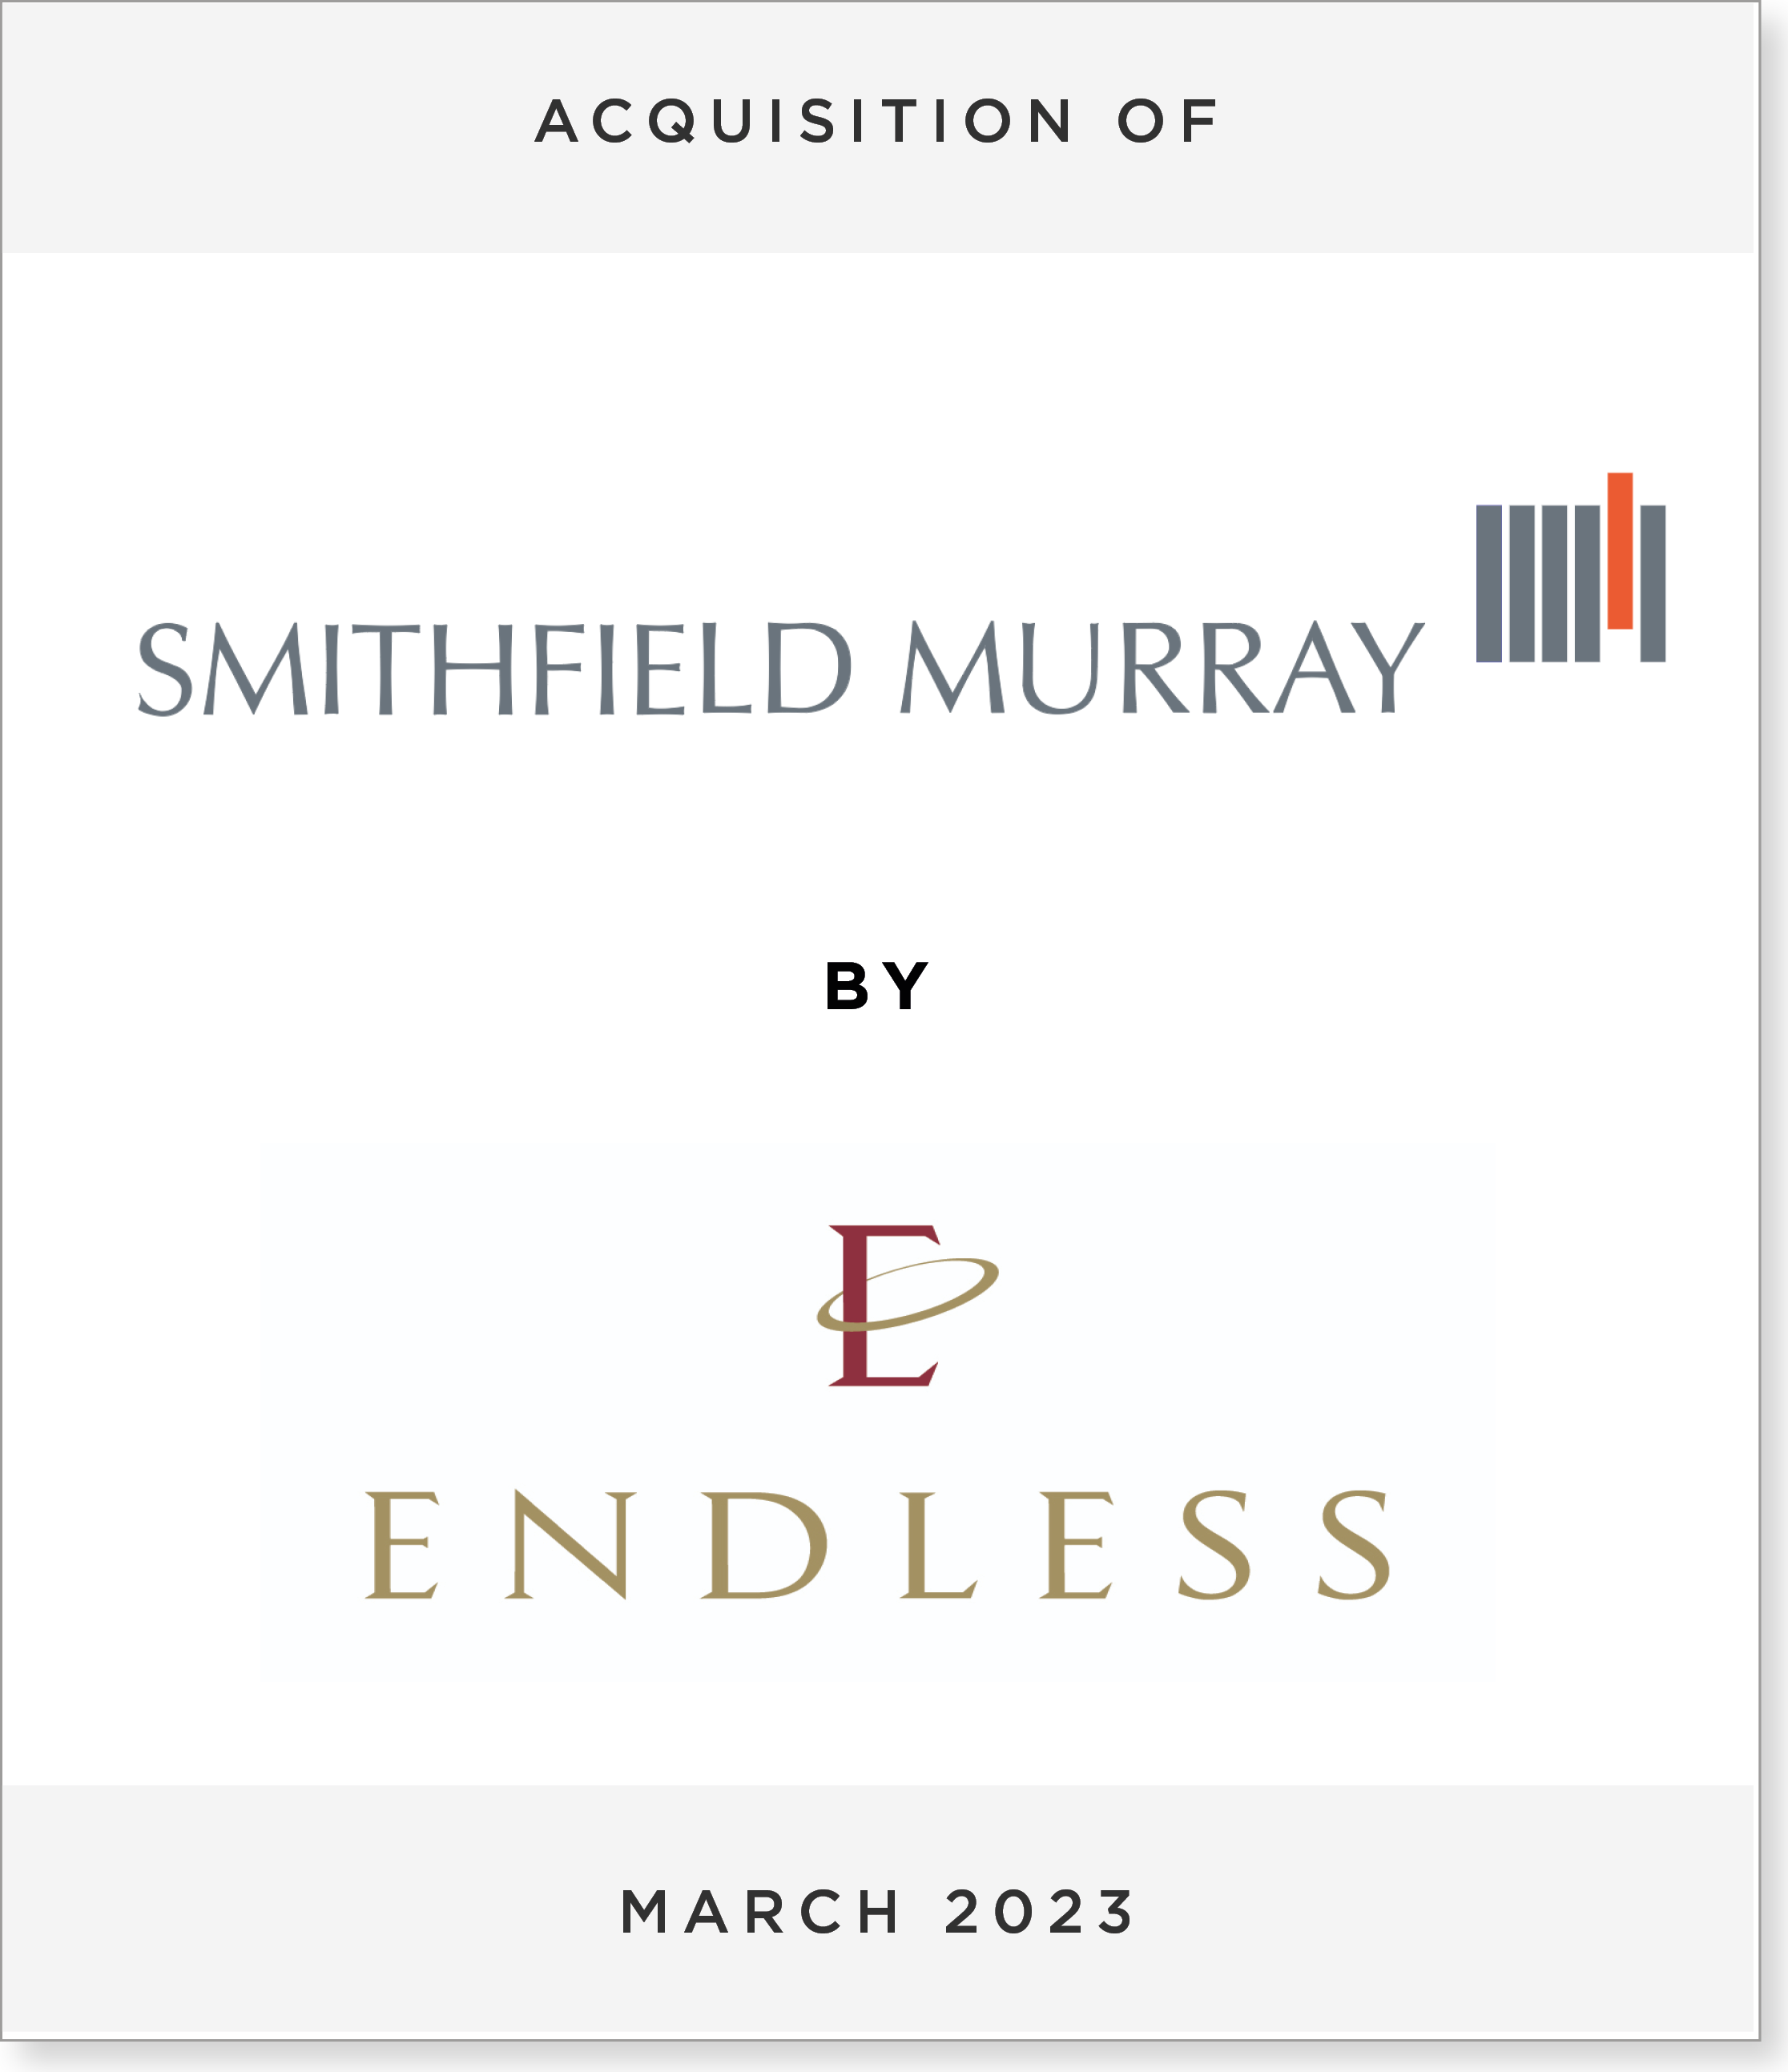 SmithfieldMurray_EndlessYPM Acquisition of Smithfield Murray by Endless